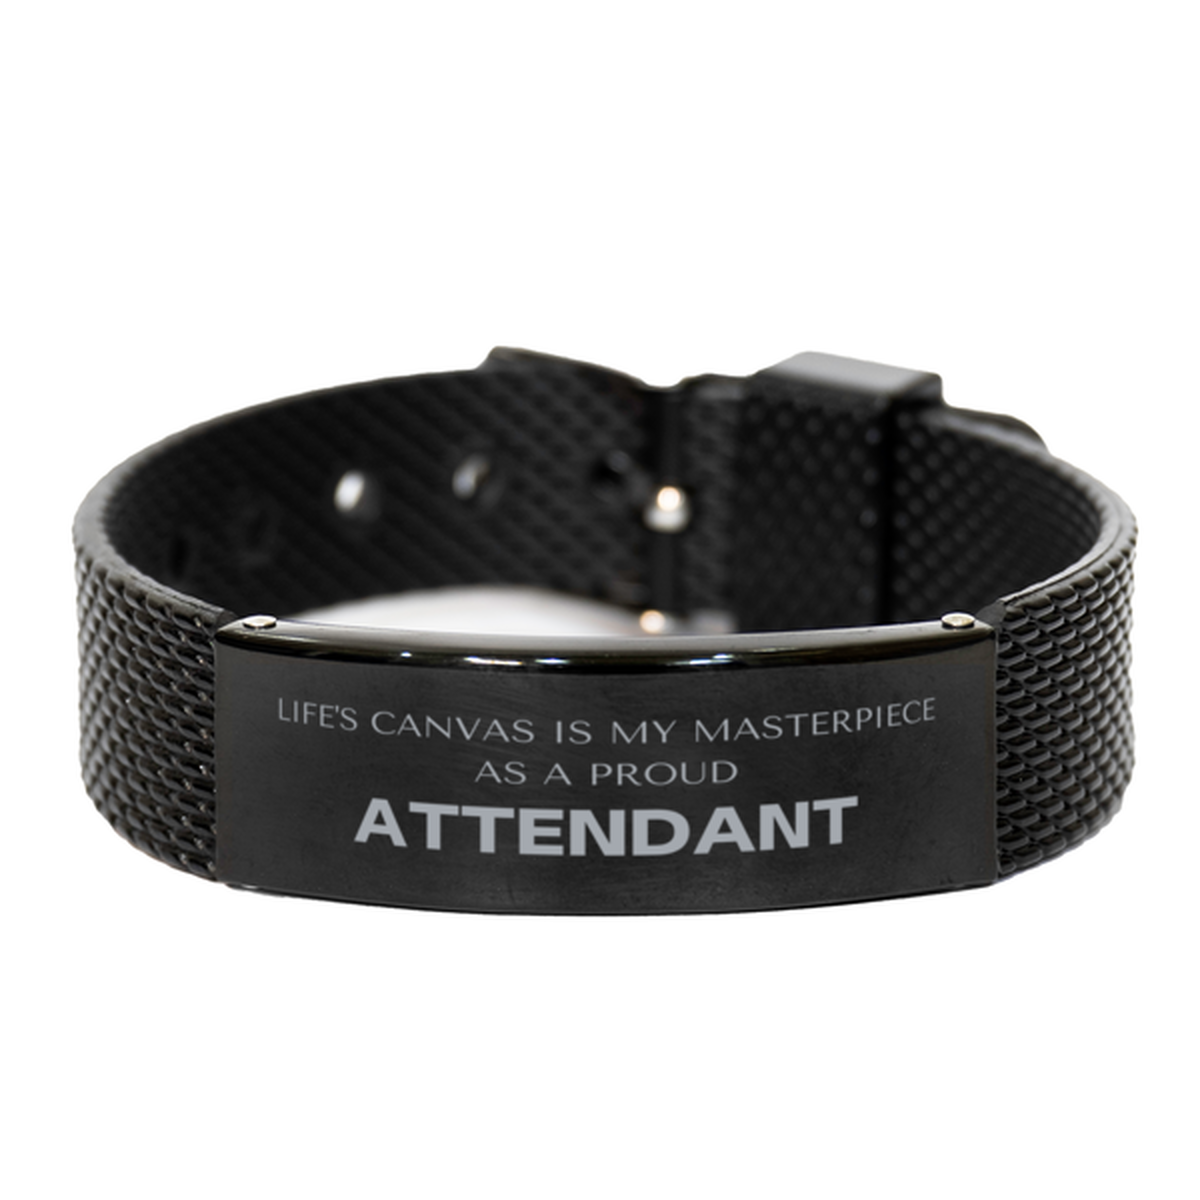 Proud Attendant Gifts, Life's canvas is my masterpiece, Epic Birthday Christmas Unique Black Shark Mesh Bracelet For Attendant, Coworkers, Men, Women, Friends